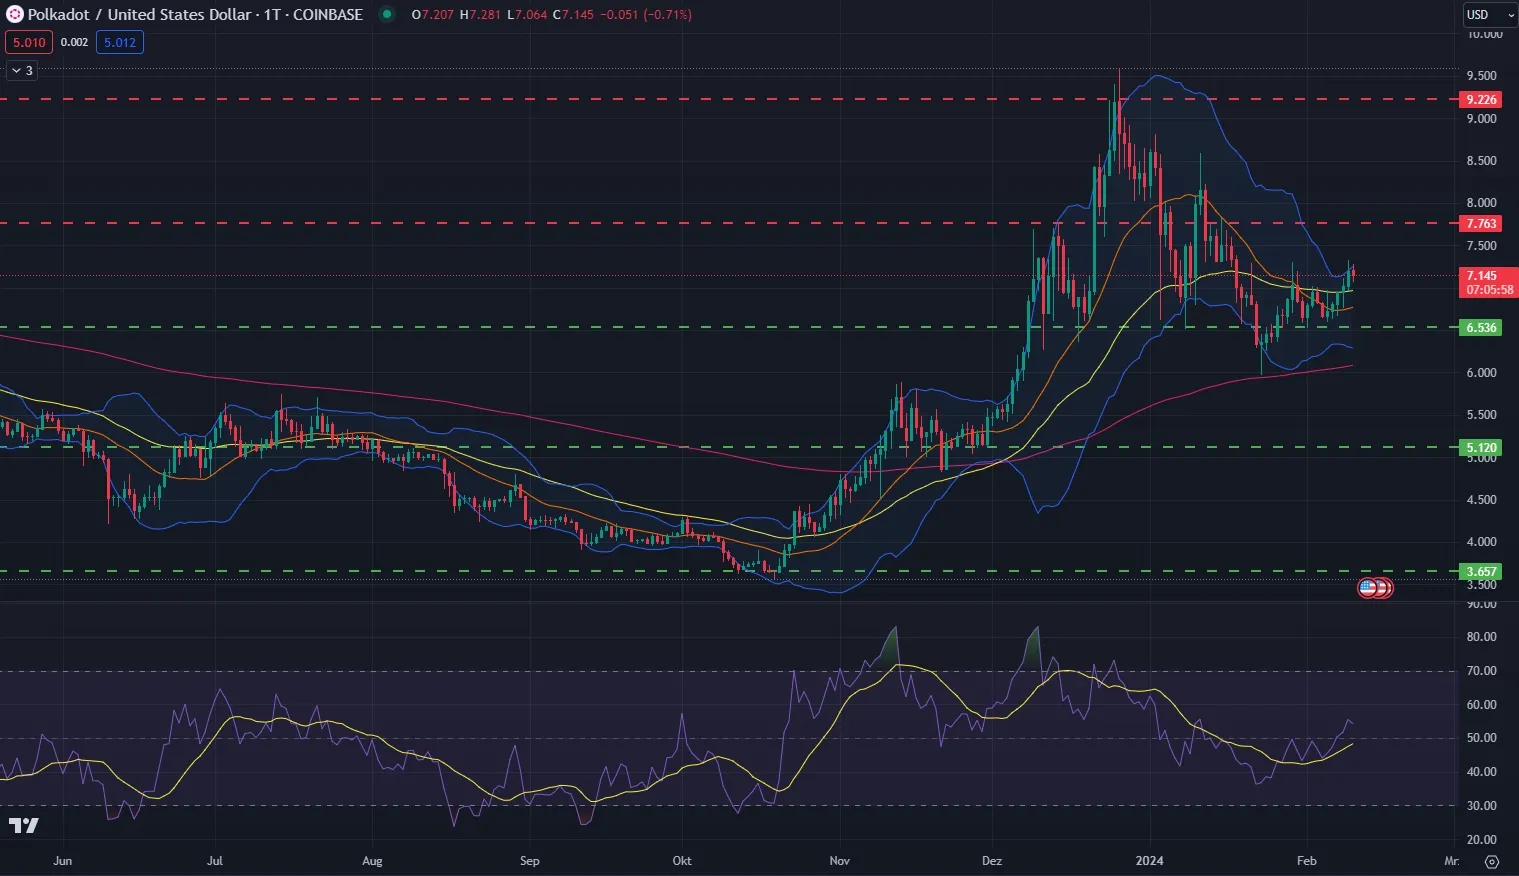 DOT Coin Kurs Chart in Tagesdarstellung (Stand: 11.06.2023)